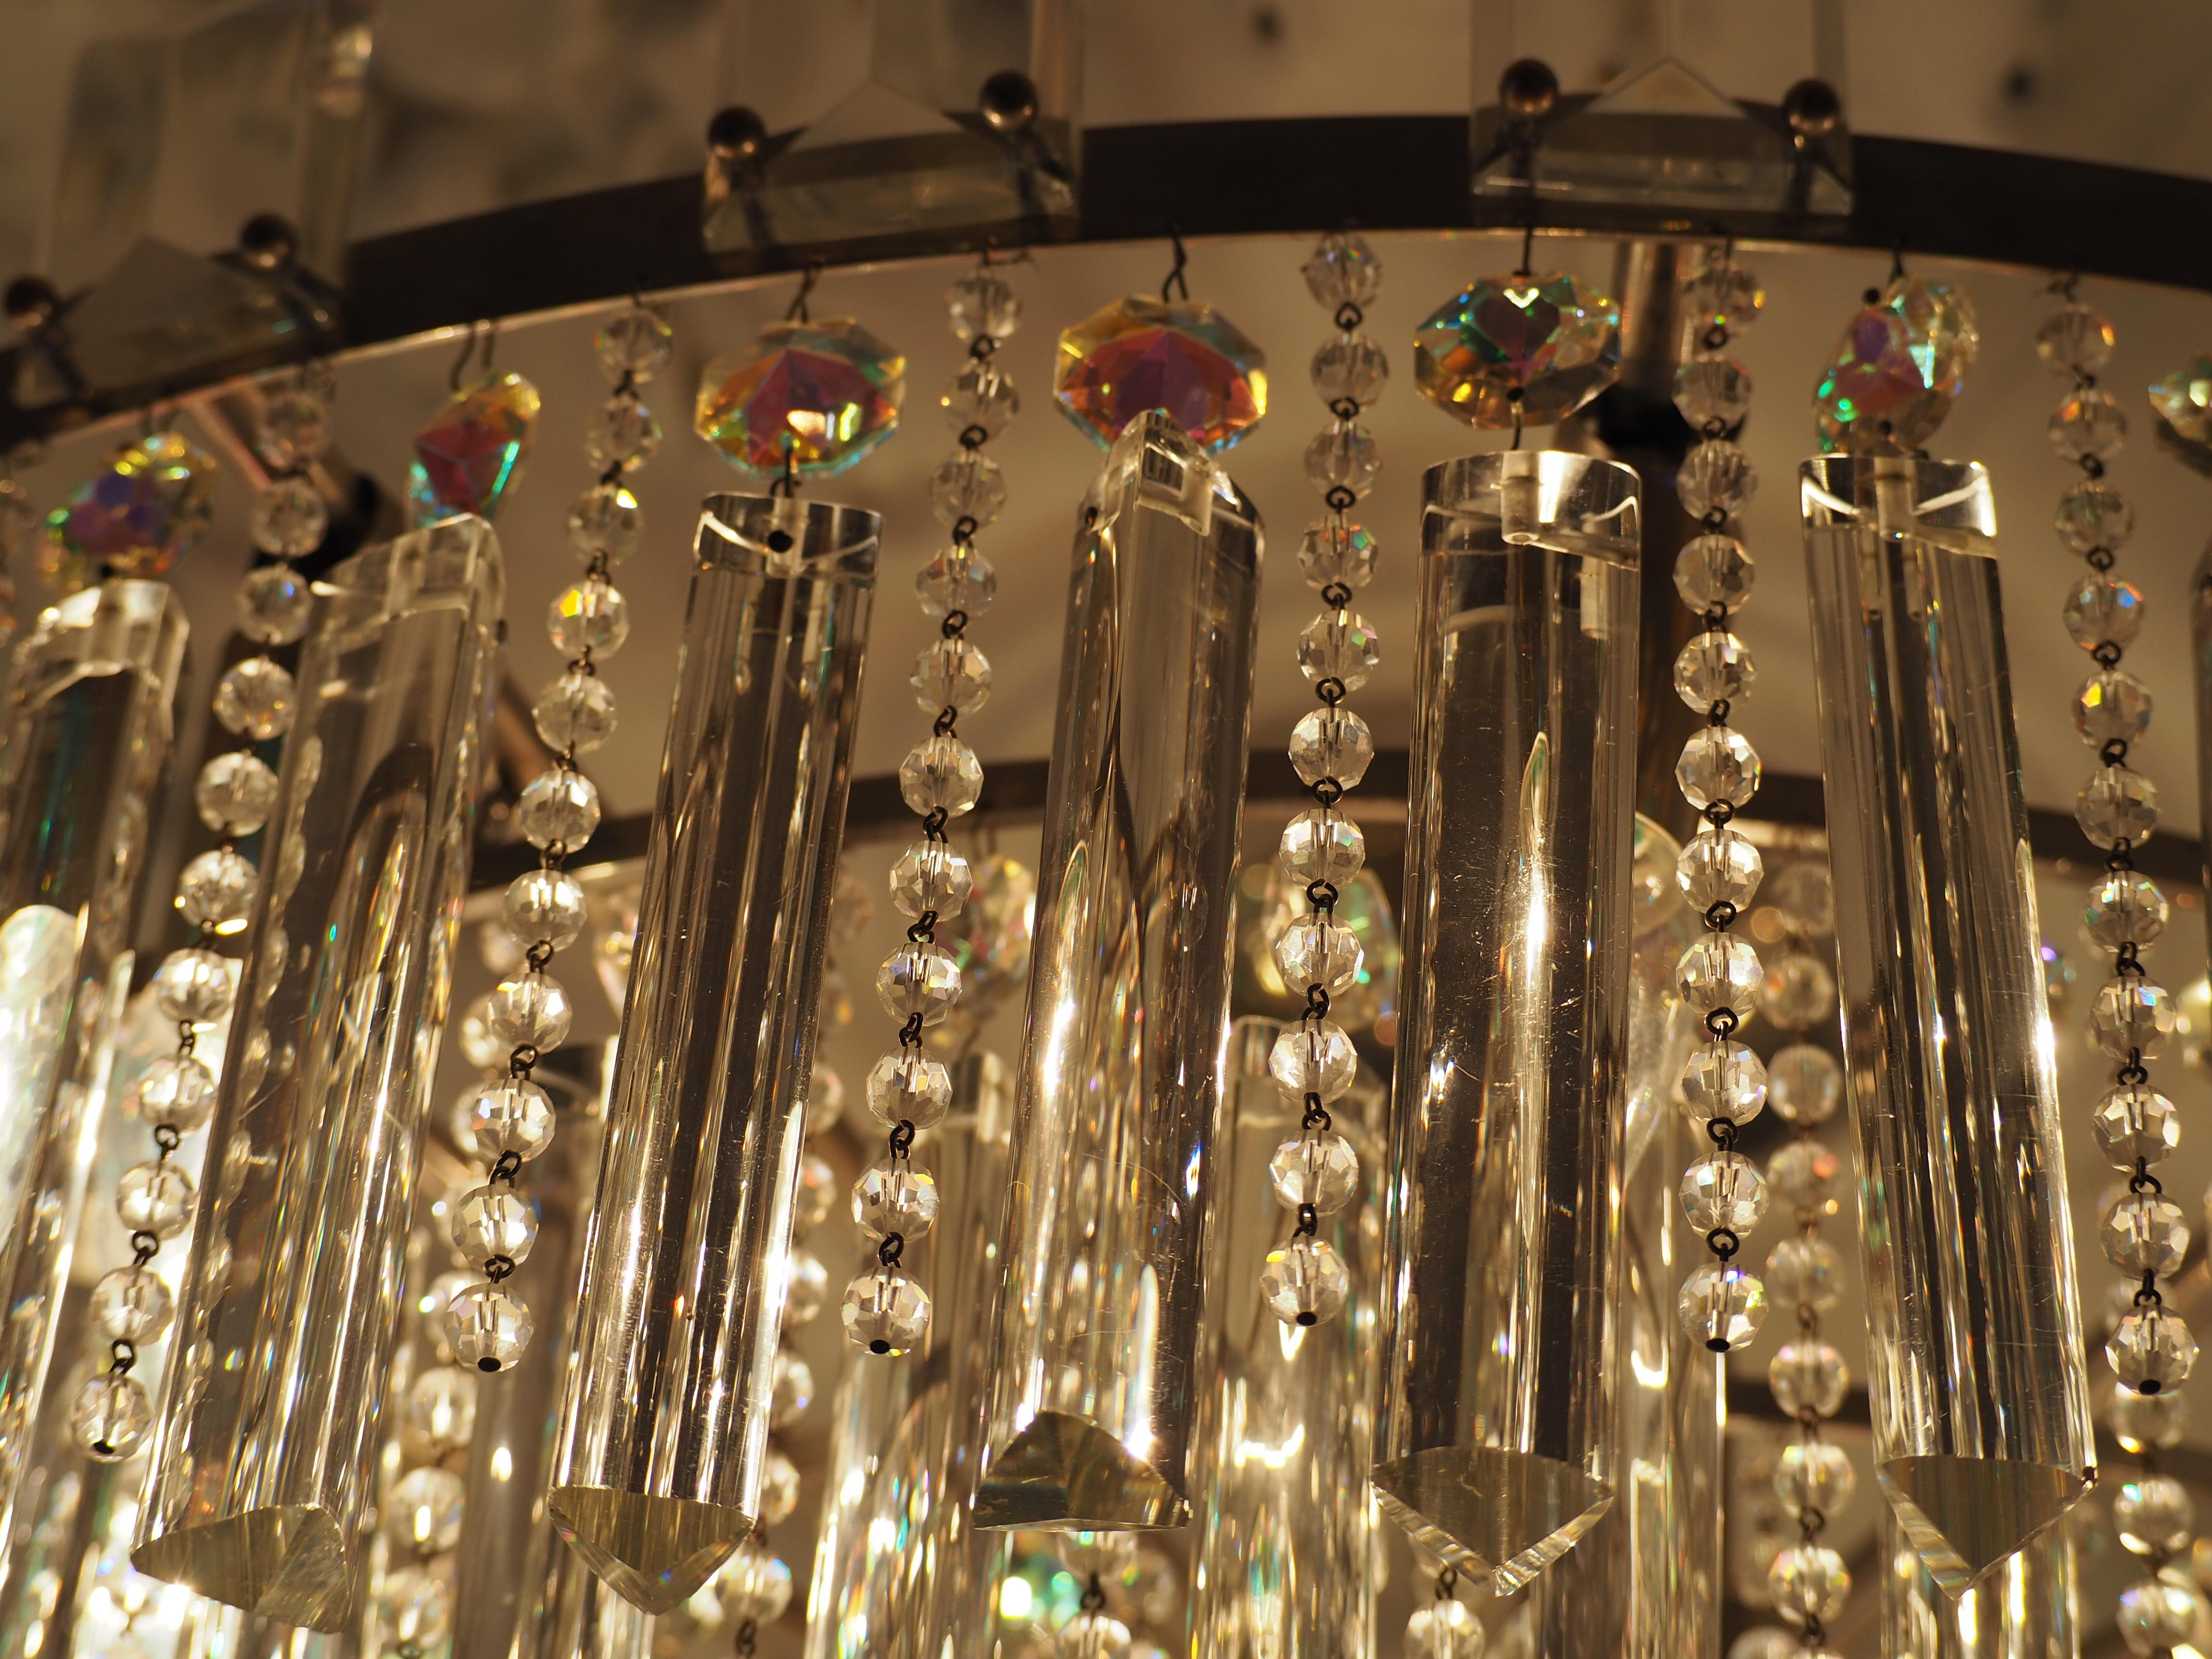 Stunning Set of Haevy Cut Glass and Nickel Chandeliers by Palwa, circa 1960s For Sale 4